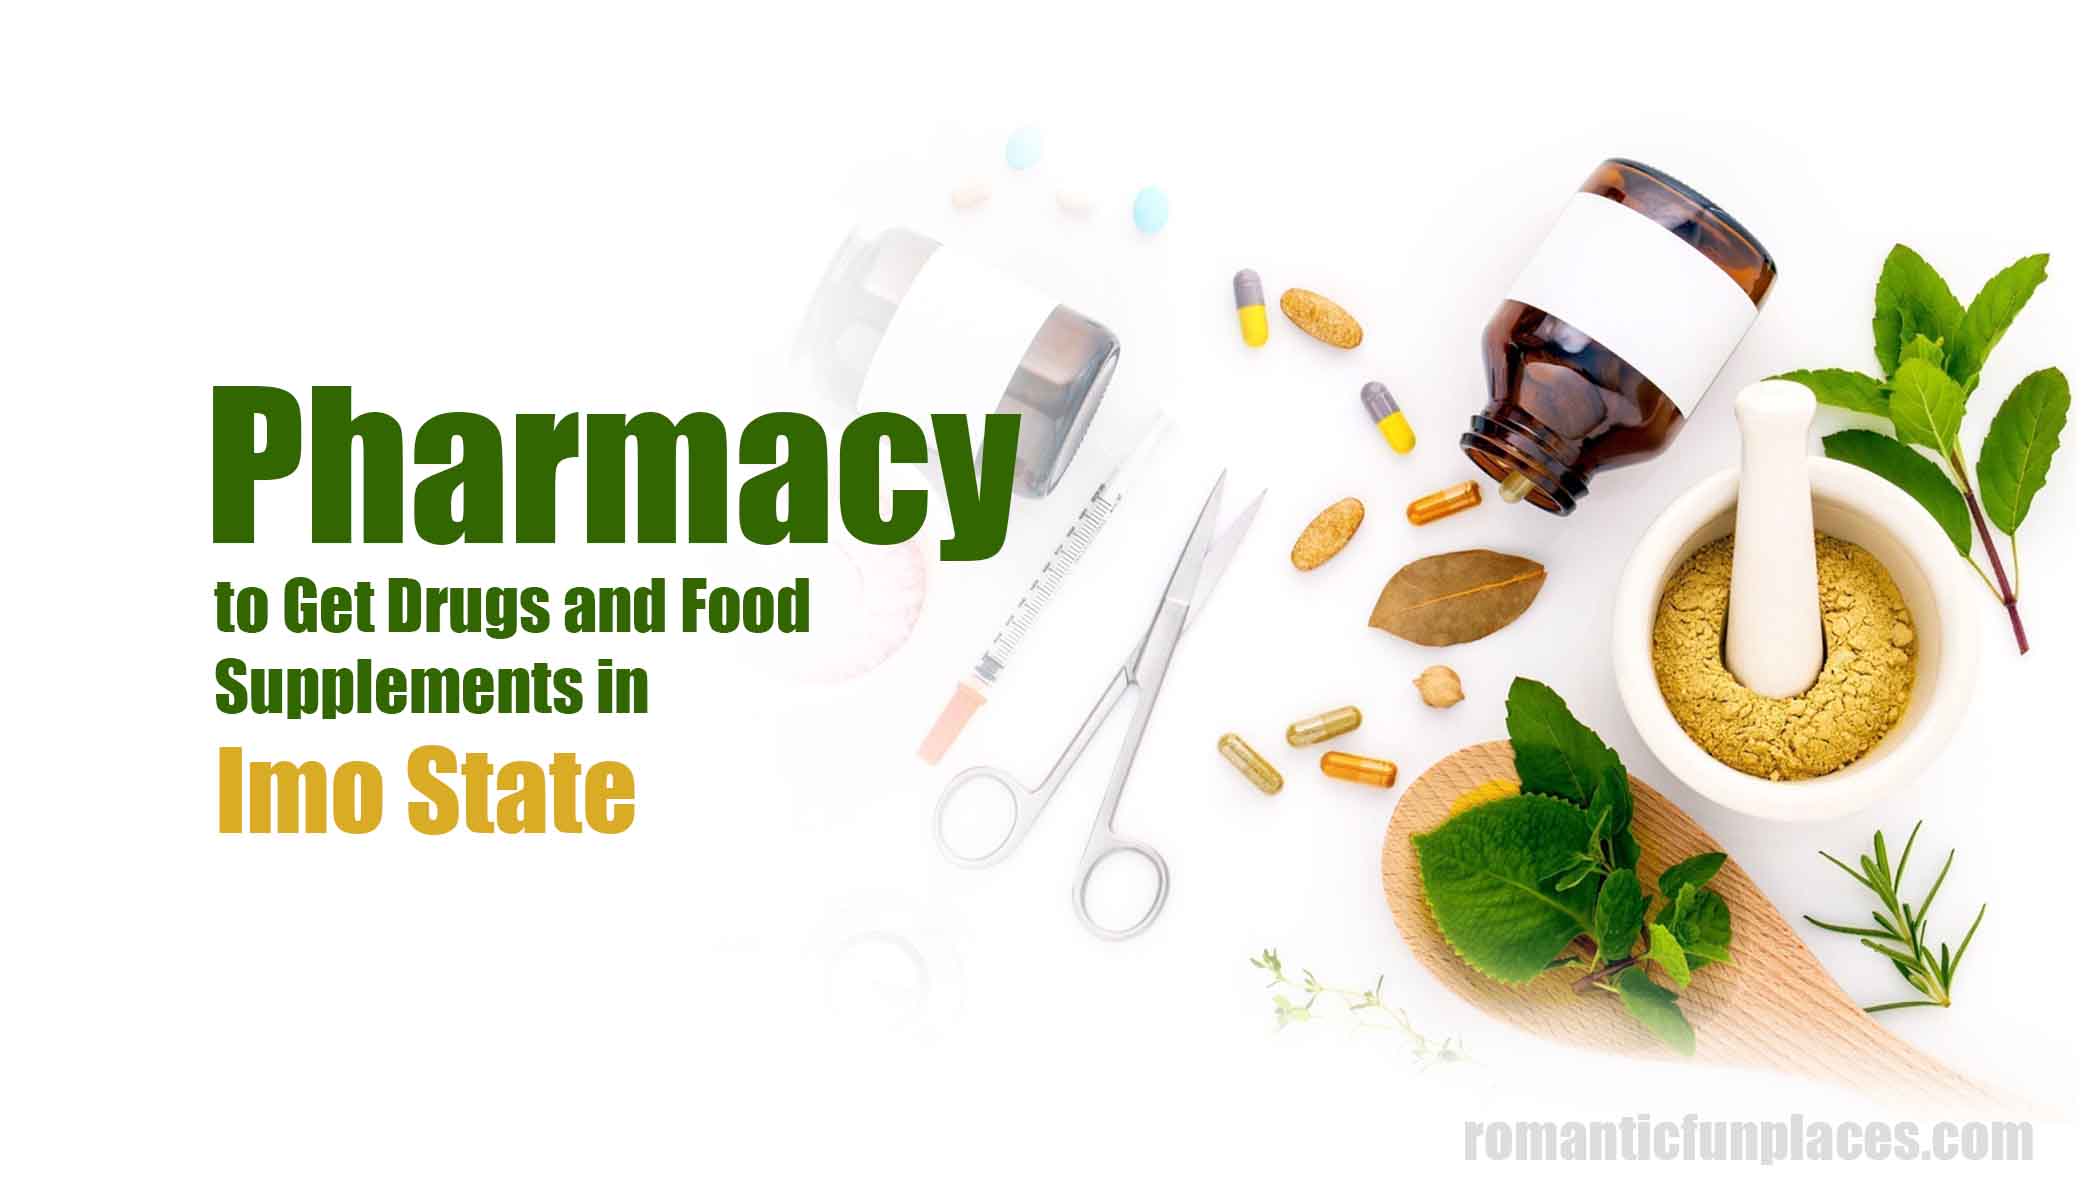 Pharmacy to Get Drugs and Food Supplements in Imo State